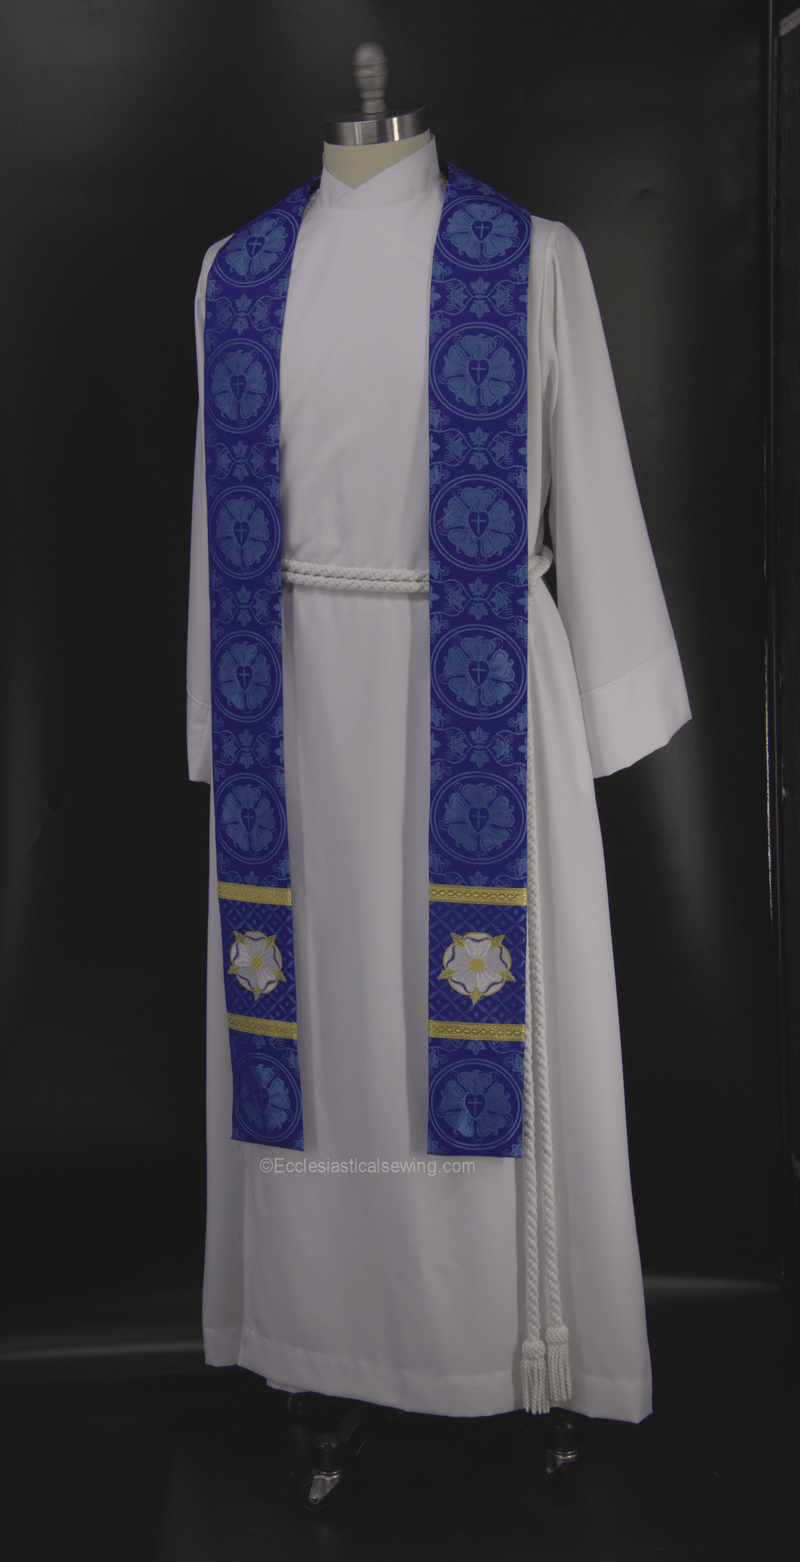 files/messianic-rose-advent-stole-or-advent-pastor-priest-stole-ecclesiastical-sewing-2-31790326579456.png